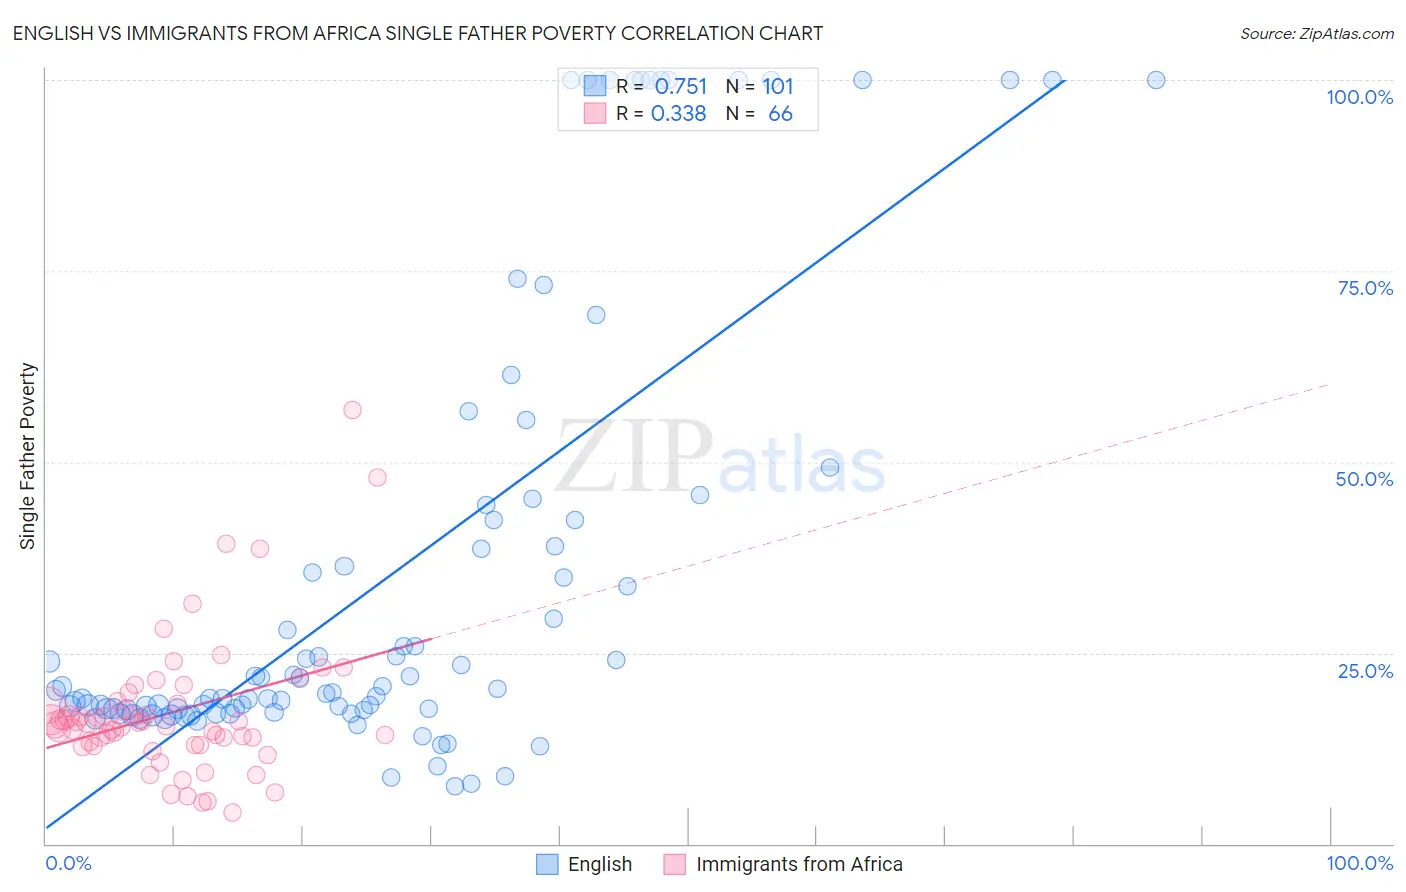 English vs Immigrants from Africa Single Father Poverty